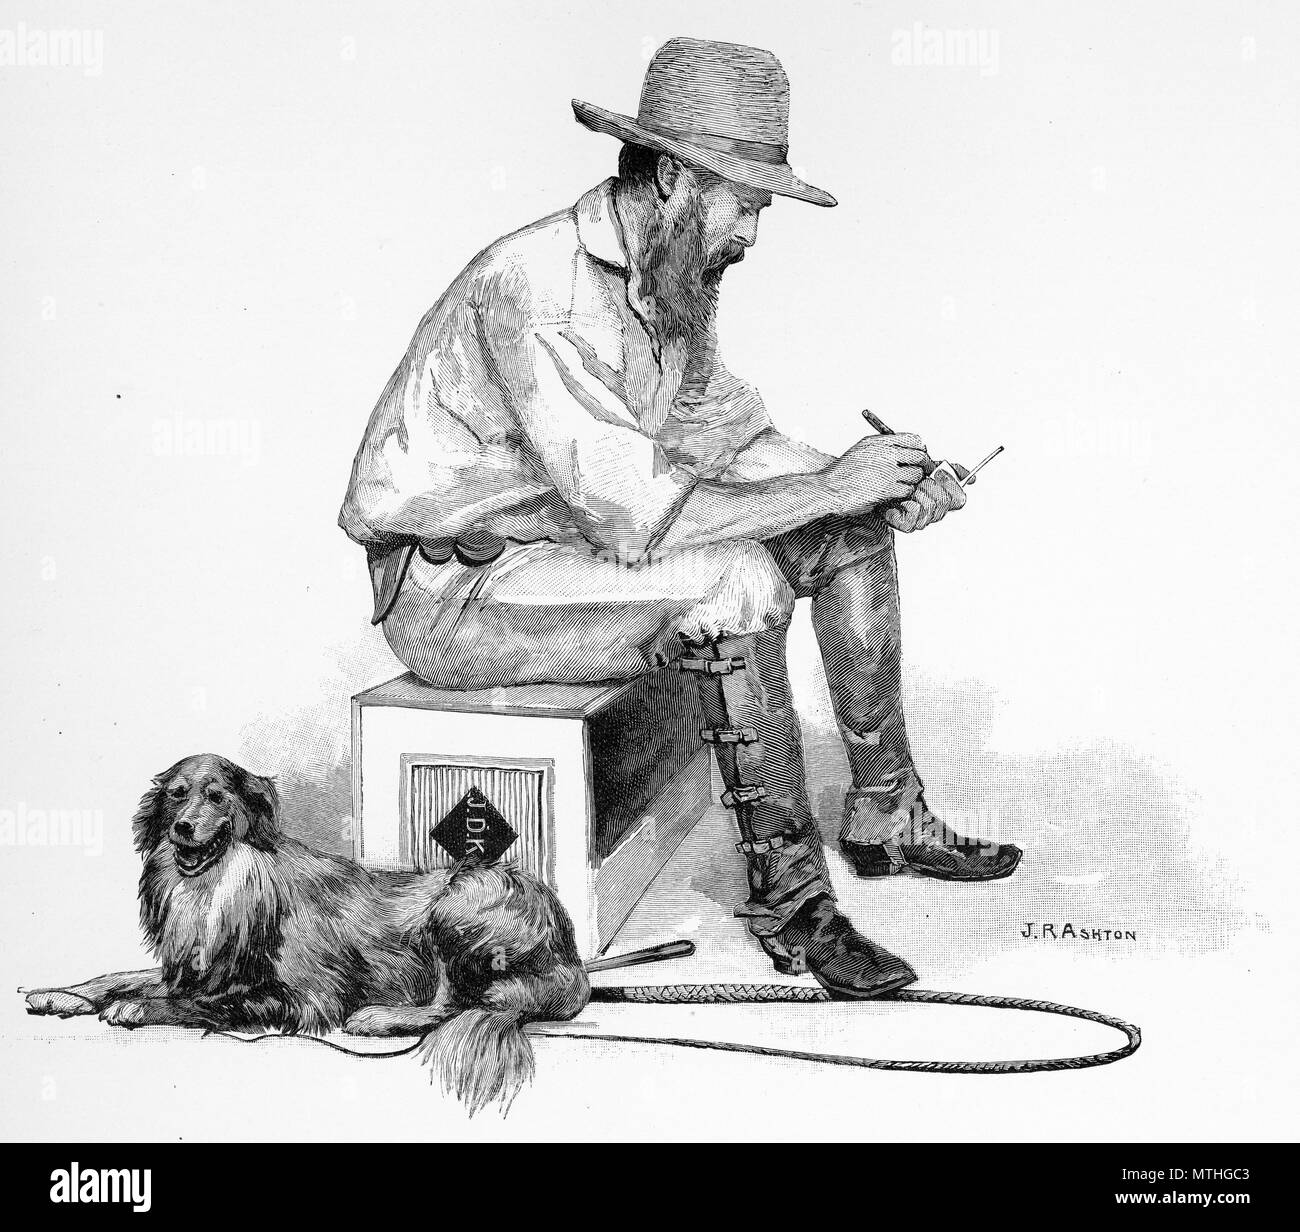 Engraving of a squatter with his dog, Australia. From the Picturesque Atlas of Australasia Vol 3, 1886 Stock Photo